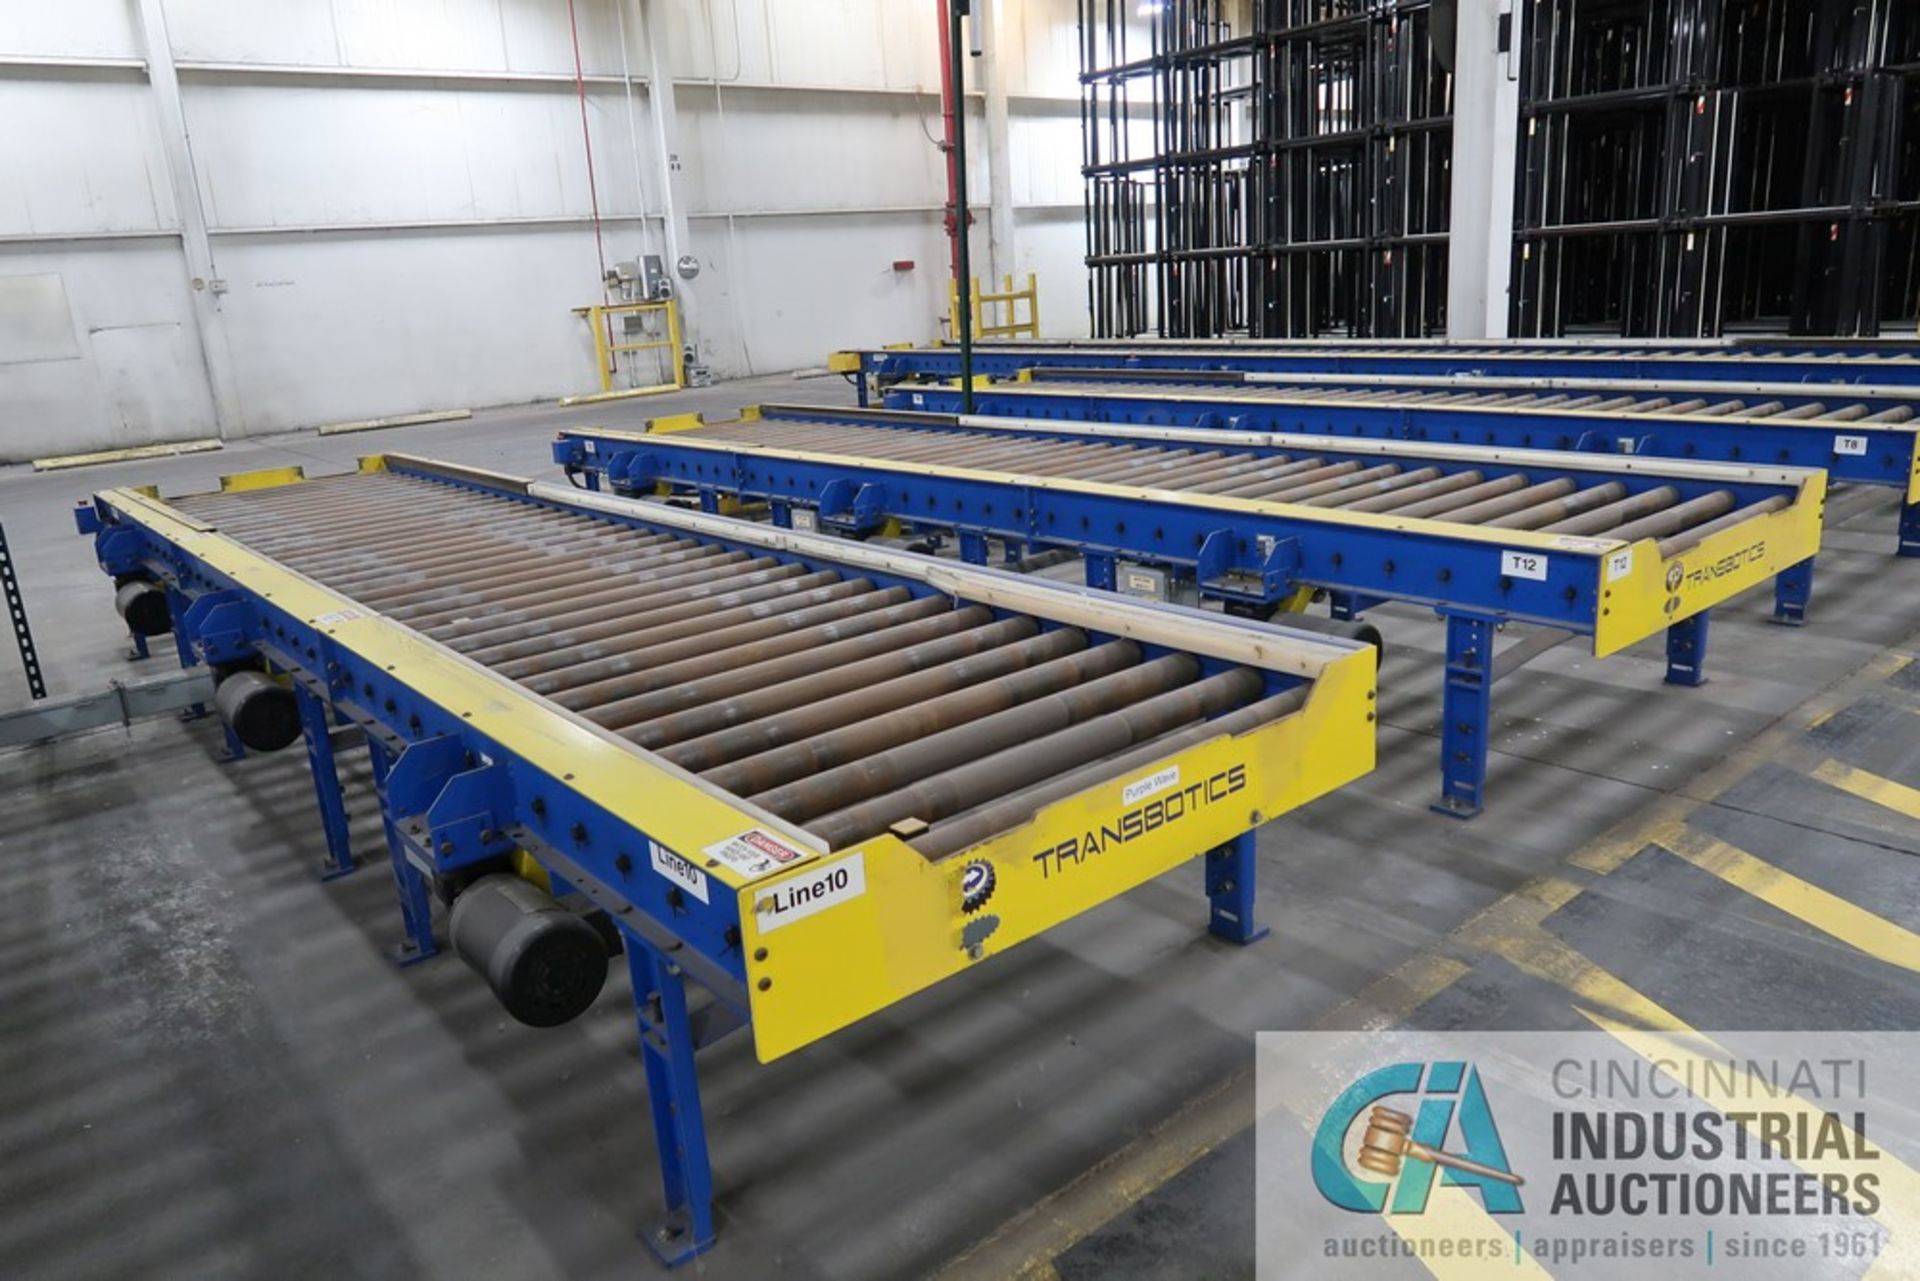 LINES 40" WIDE X 18' LONG (APPROX.) TRANSBOTICS MODEL CDLR-7244 CONVEYOR ACCUMULATOR STATIONS WITH - Image 2 of 18